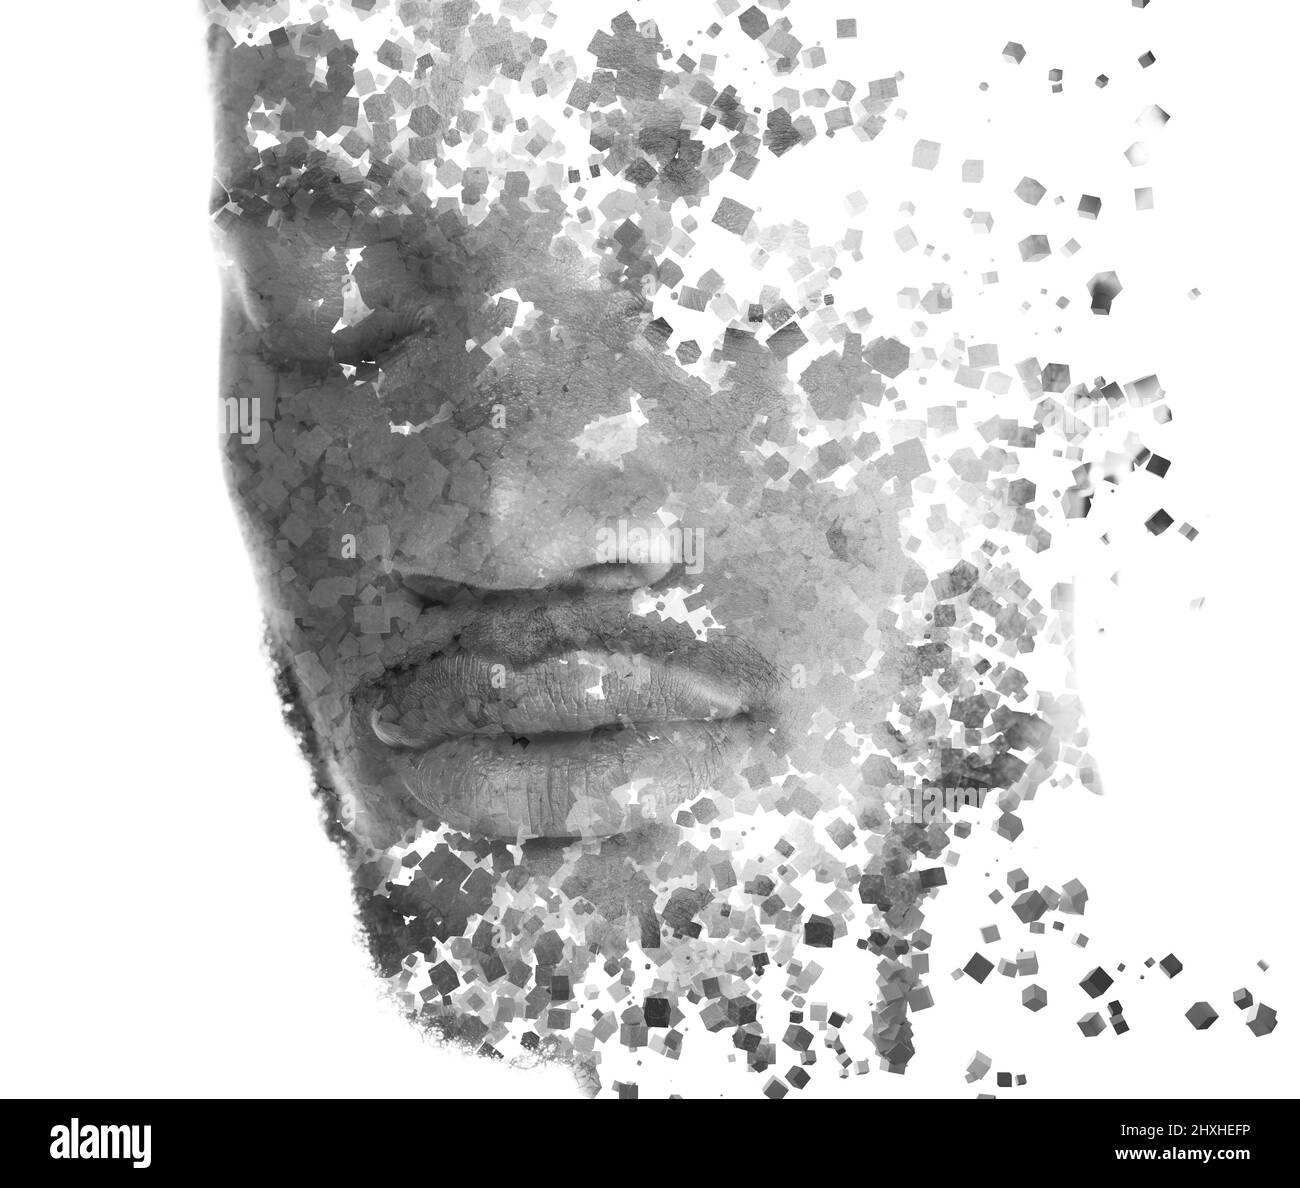 A portrait of a young man dissolving into countless particles. Stock Photo